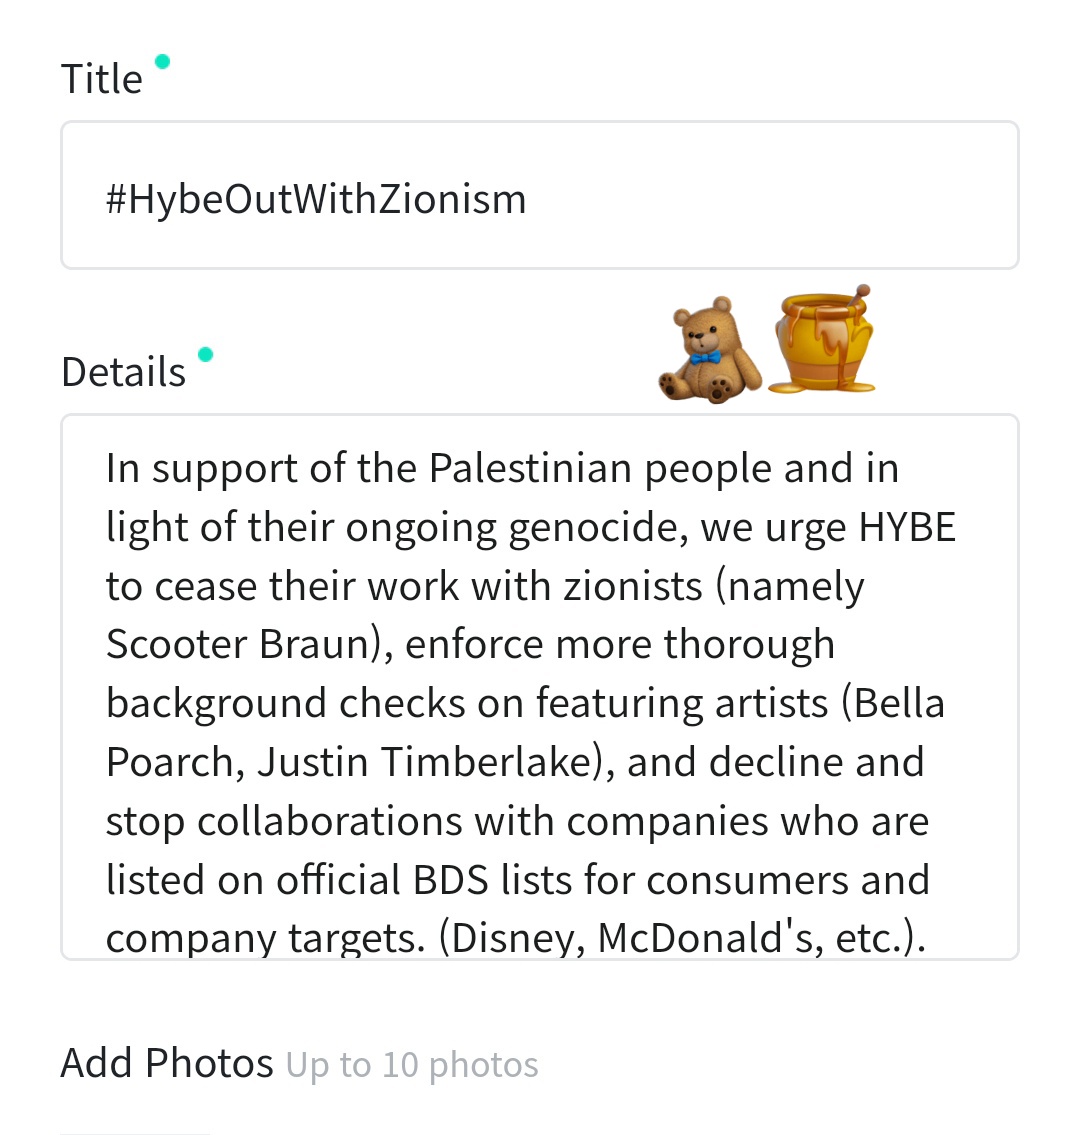 #HybeOutWithZionism #DecemberBoycott and I'll see ya next month again!